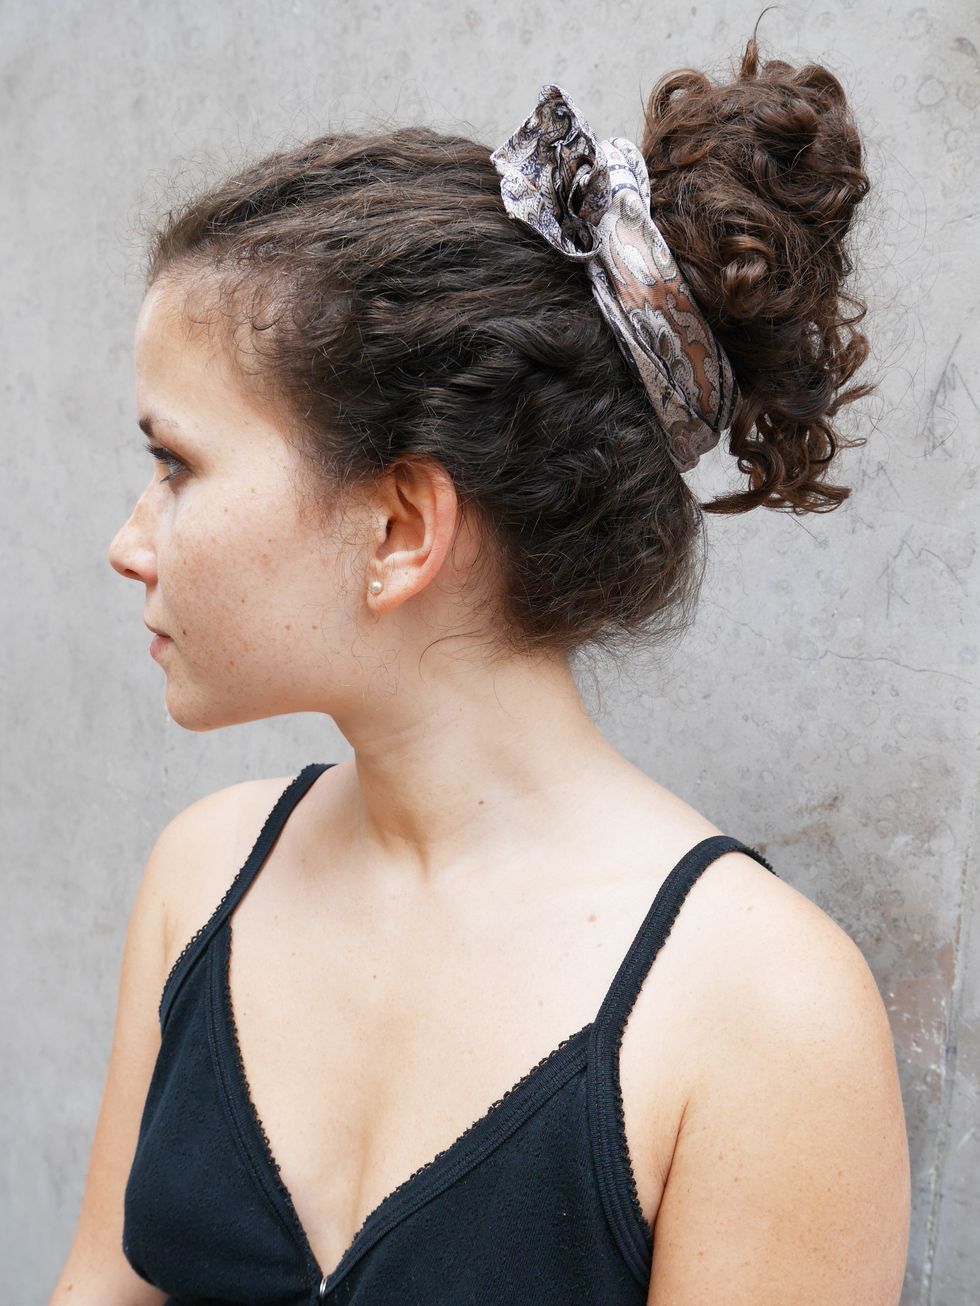 Ear, Hairstyle, Chin, Forehead, Shoulder, Style, Hair accessory, Beauty, Fashion, Neck, 